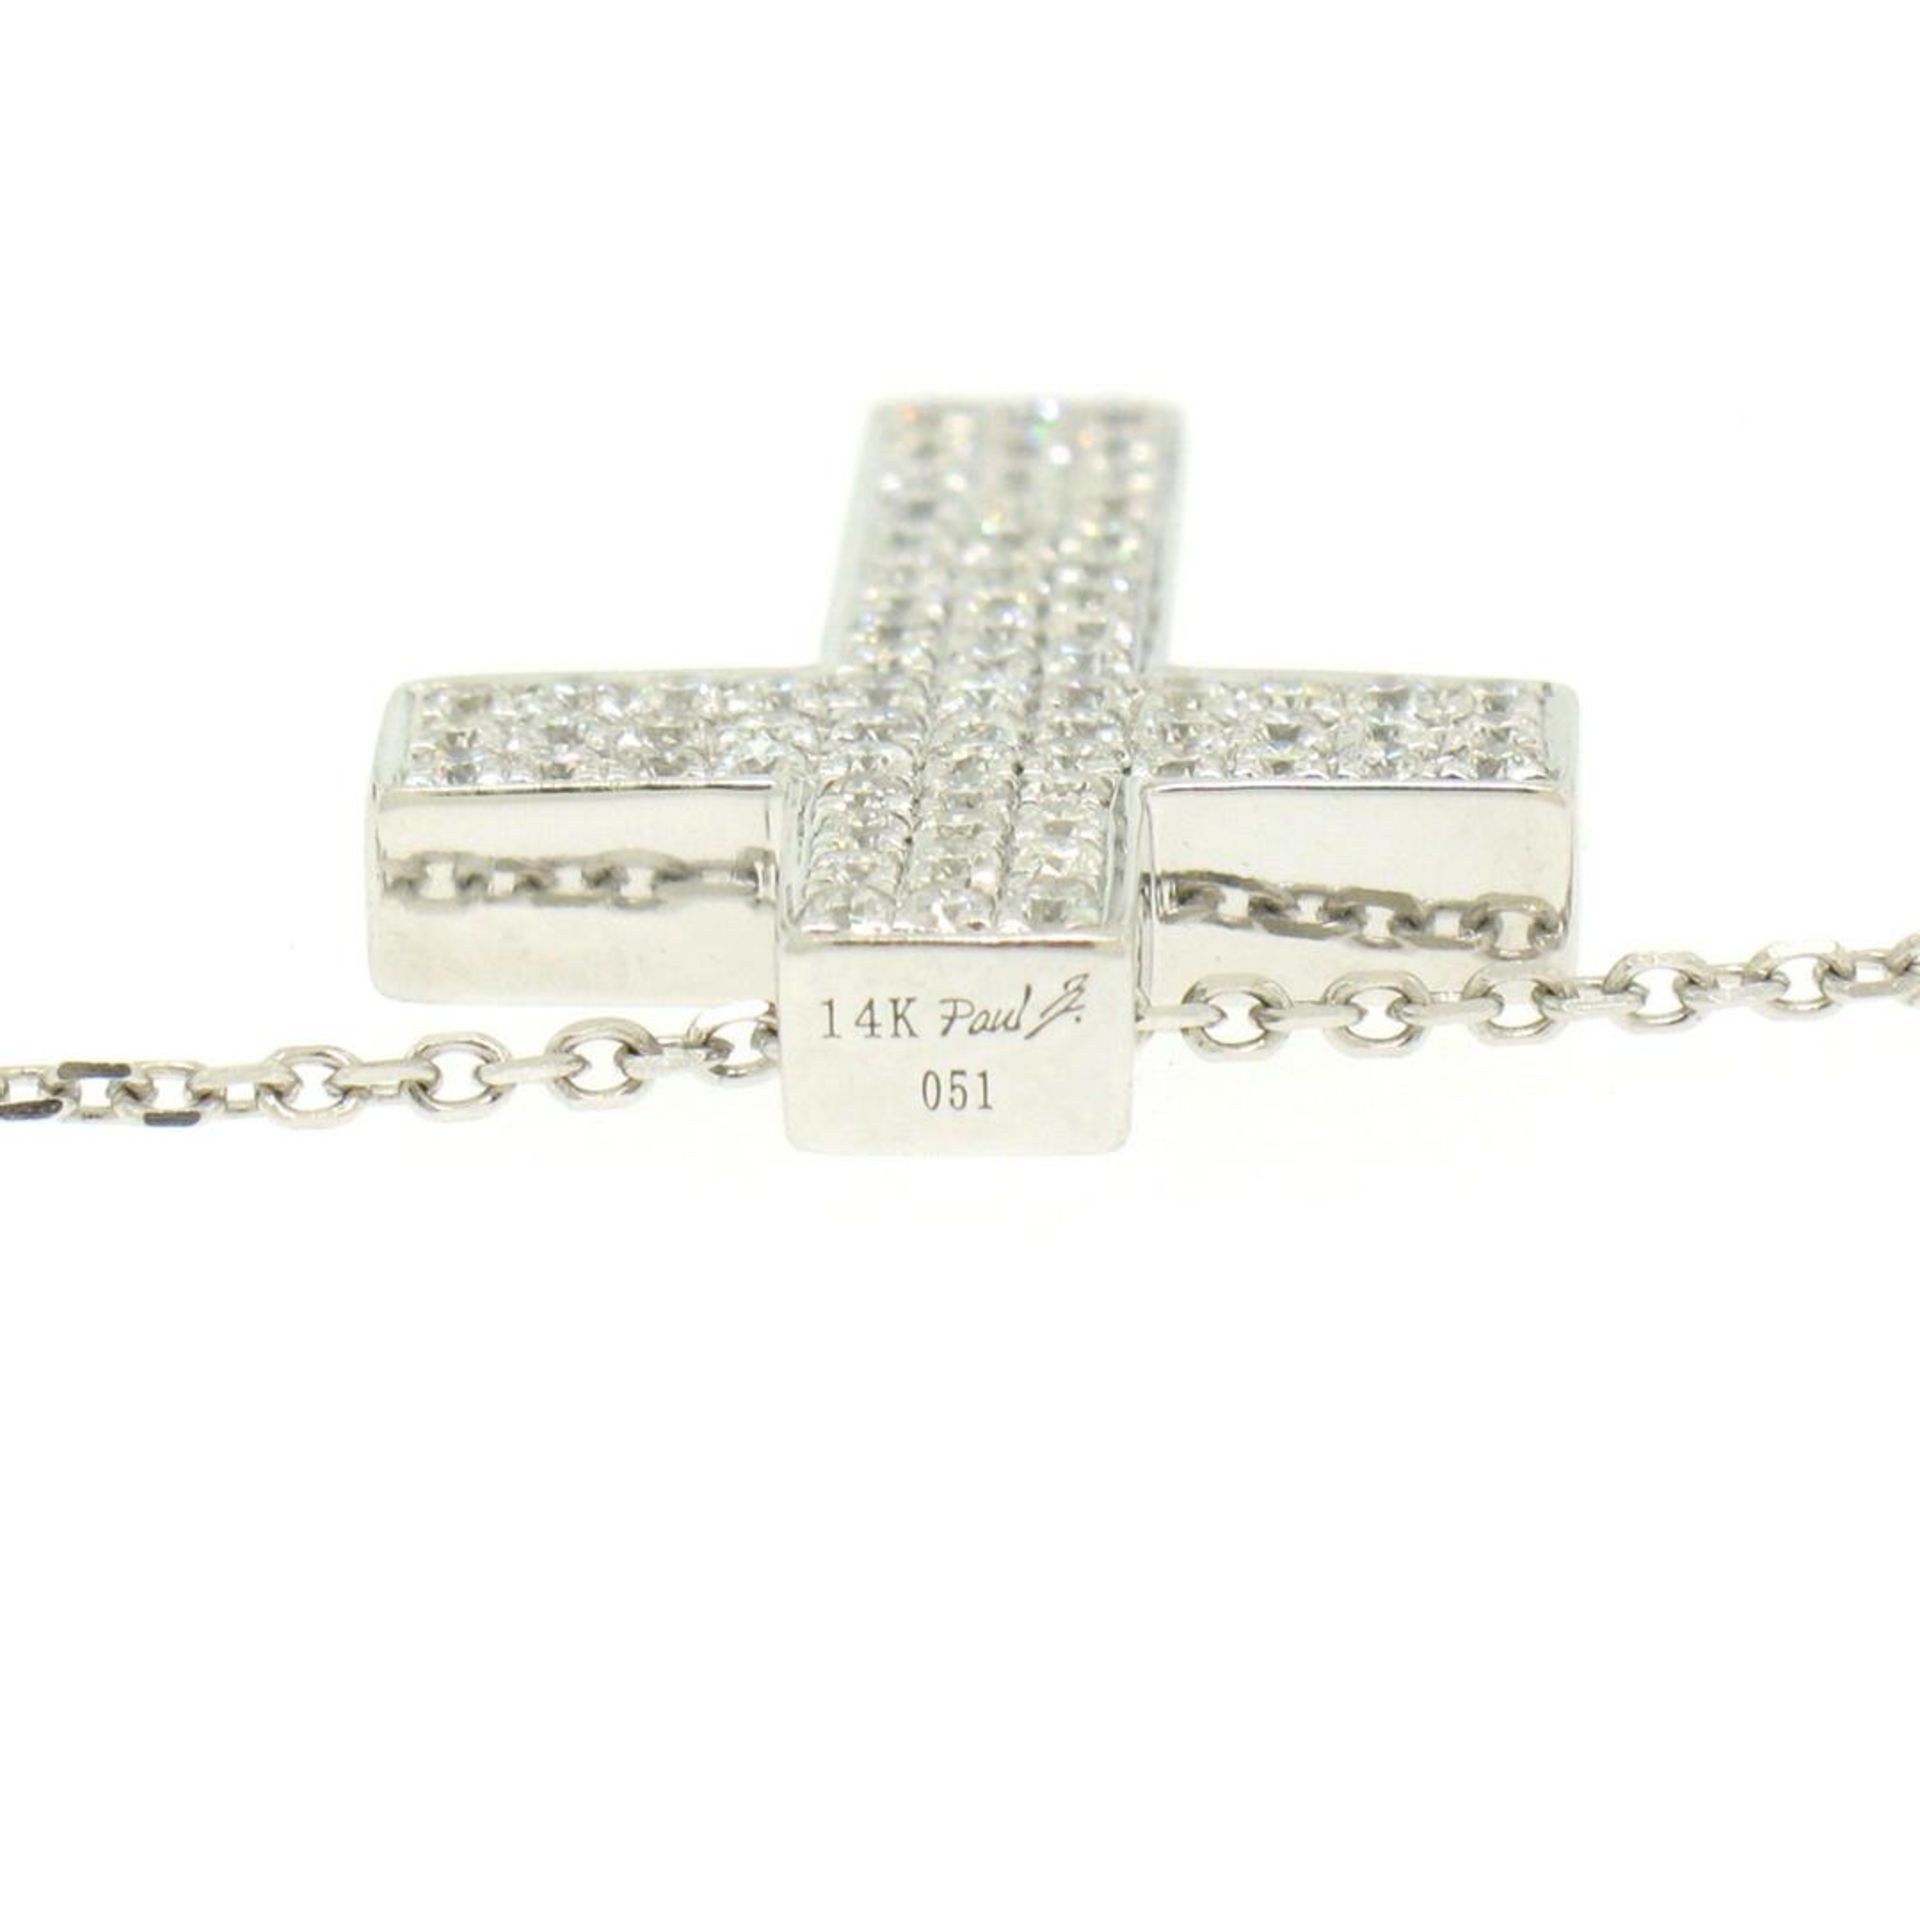 14K White Gold 0.51 ctw Micro Pave Diamond Cross Pendant w/ 18" Cable Link Chain - Image 6 of 8